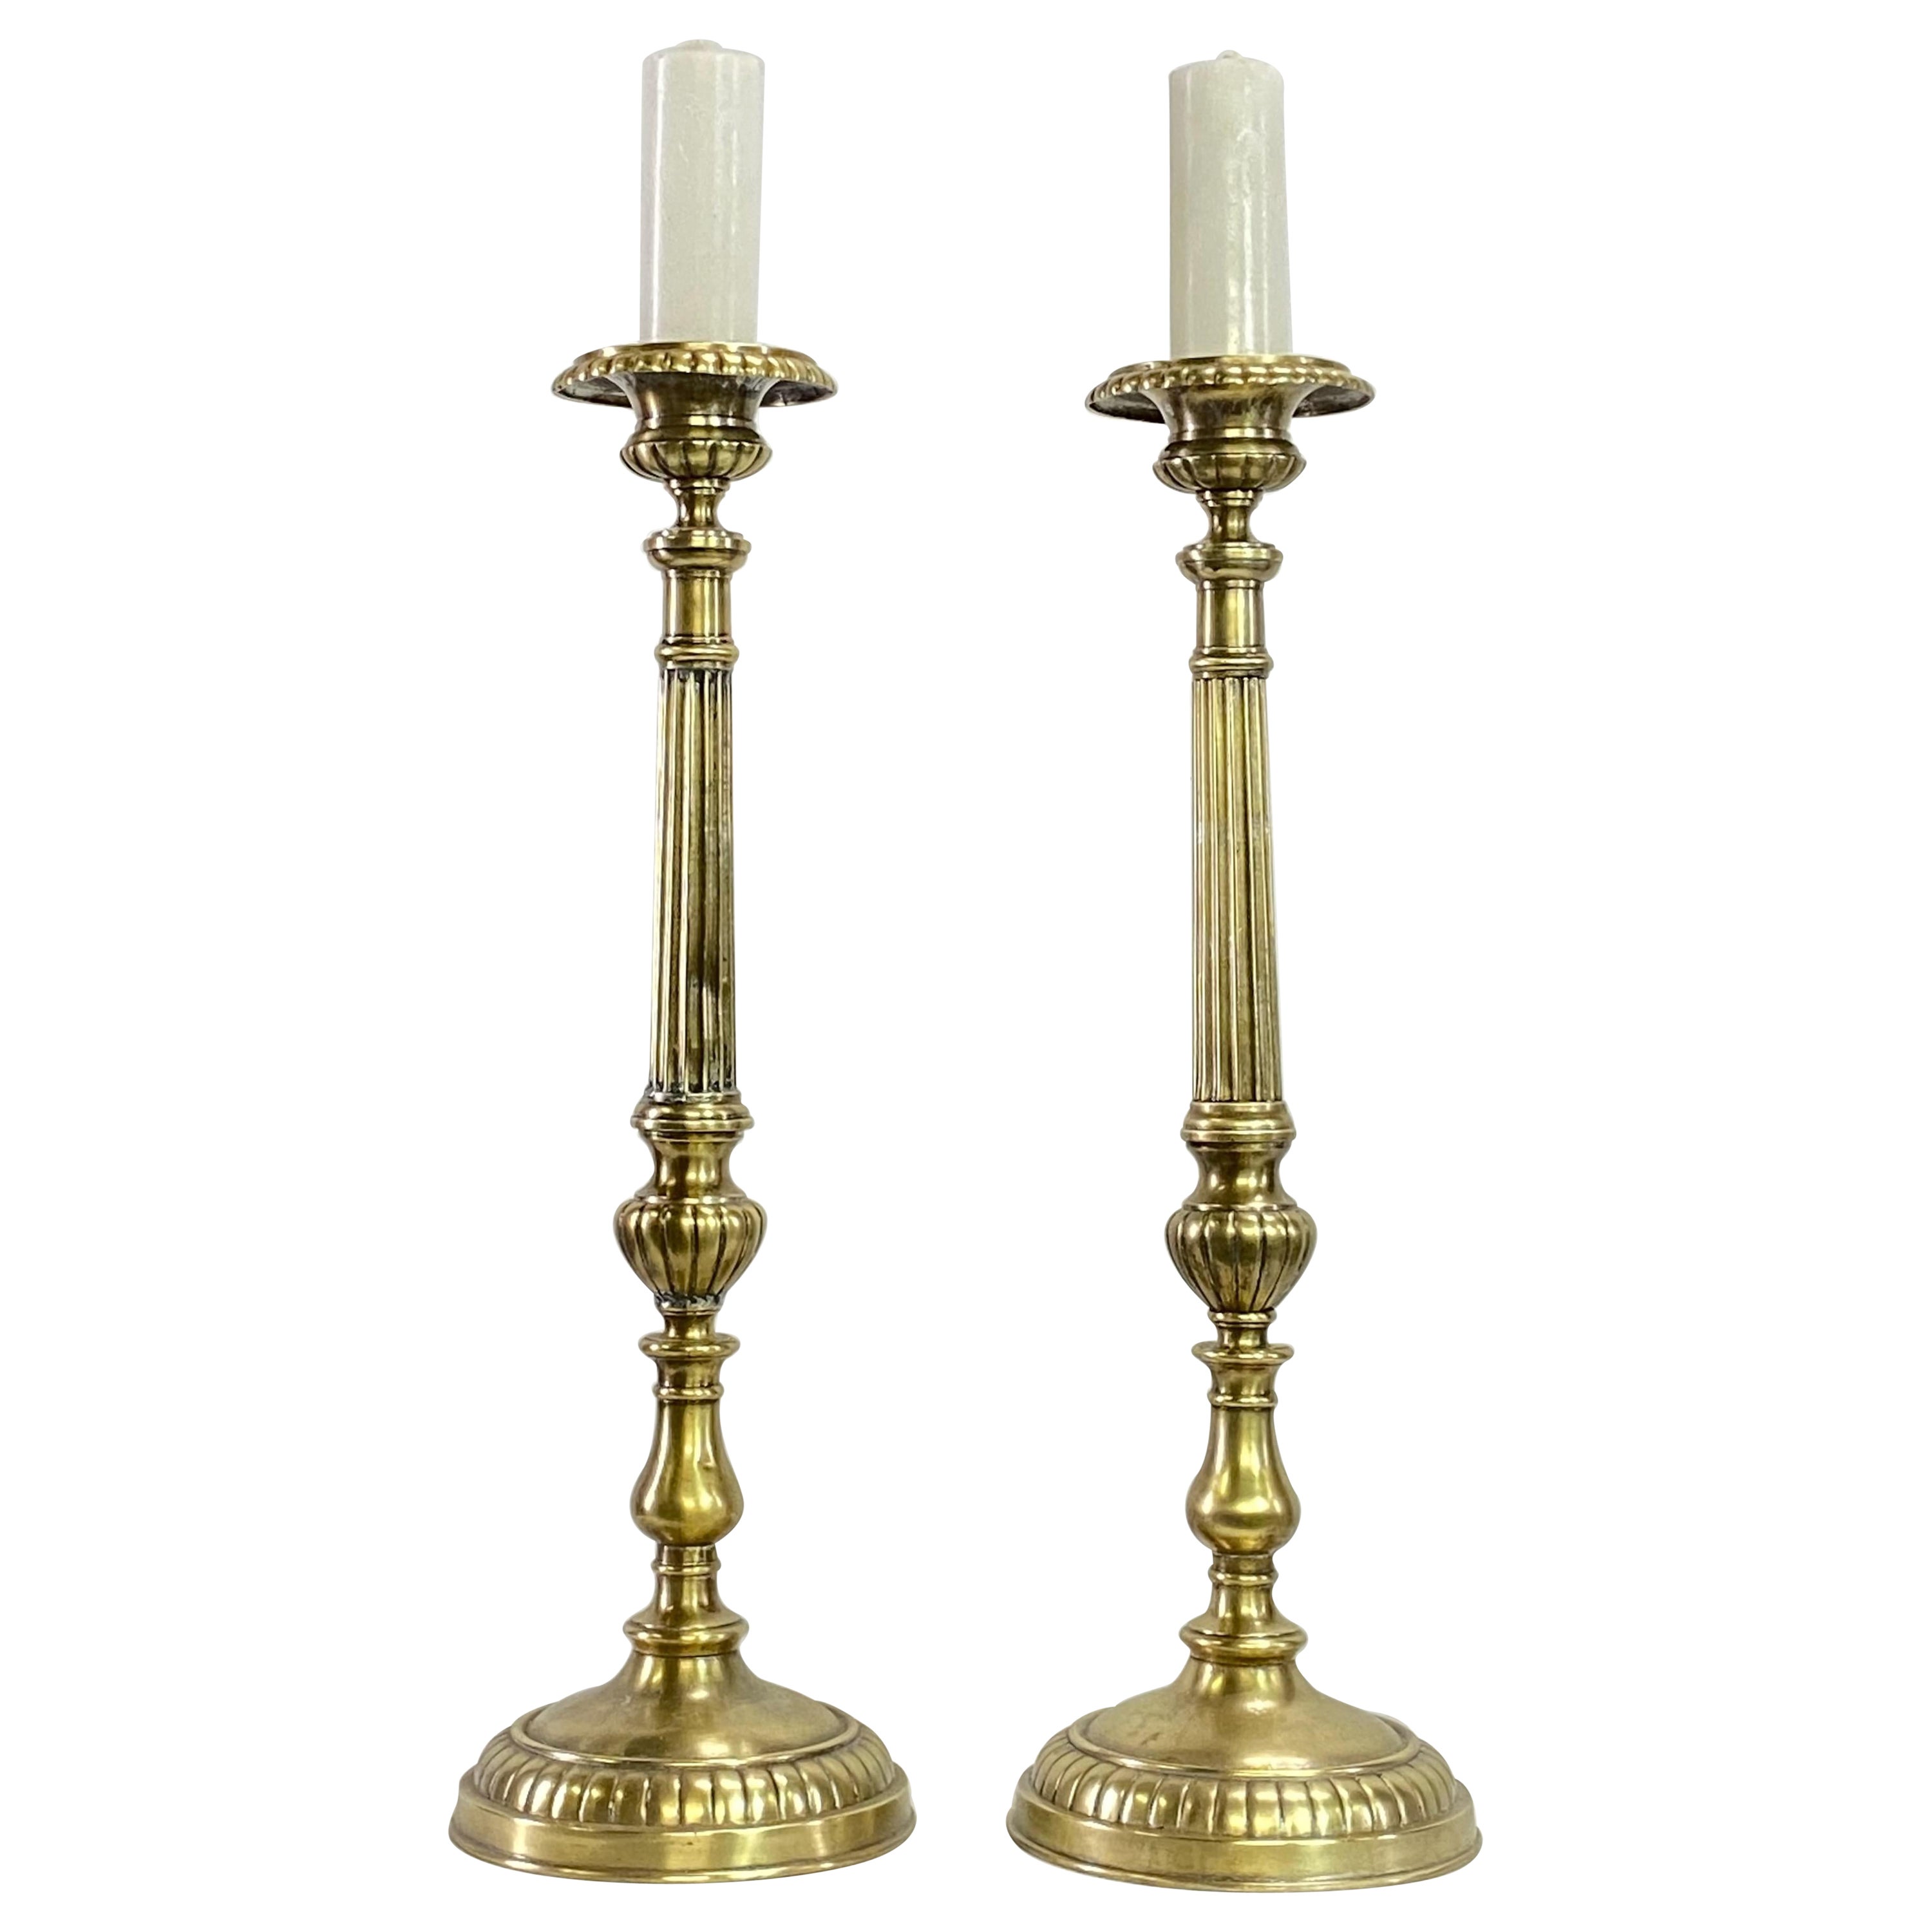 Pair of Early 19th Century European Brass Candlesticks, circa 1840 For Sale